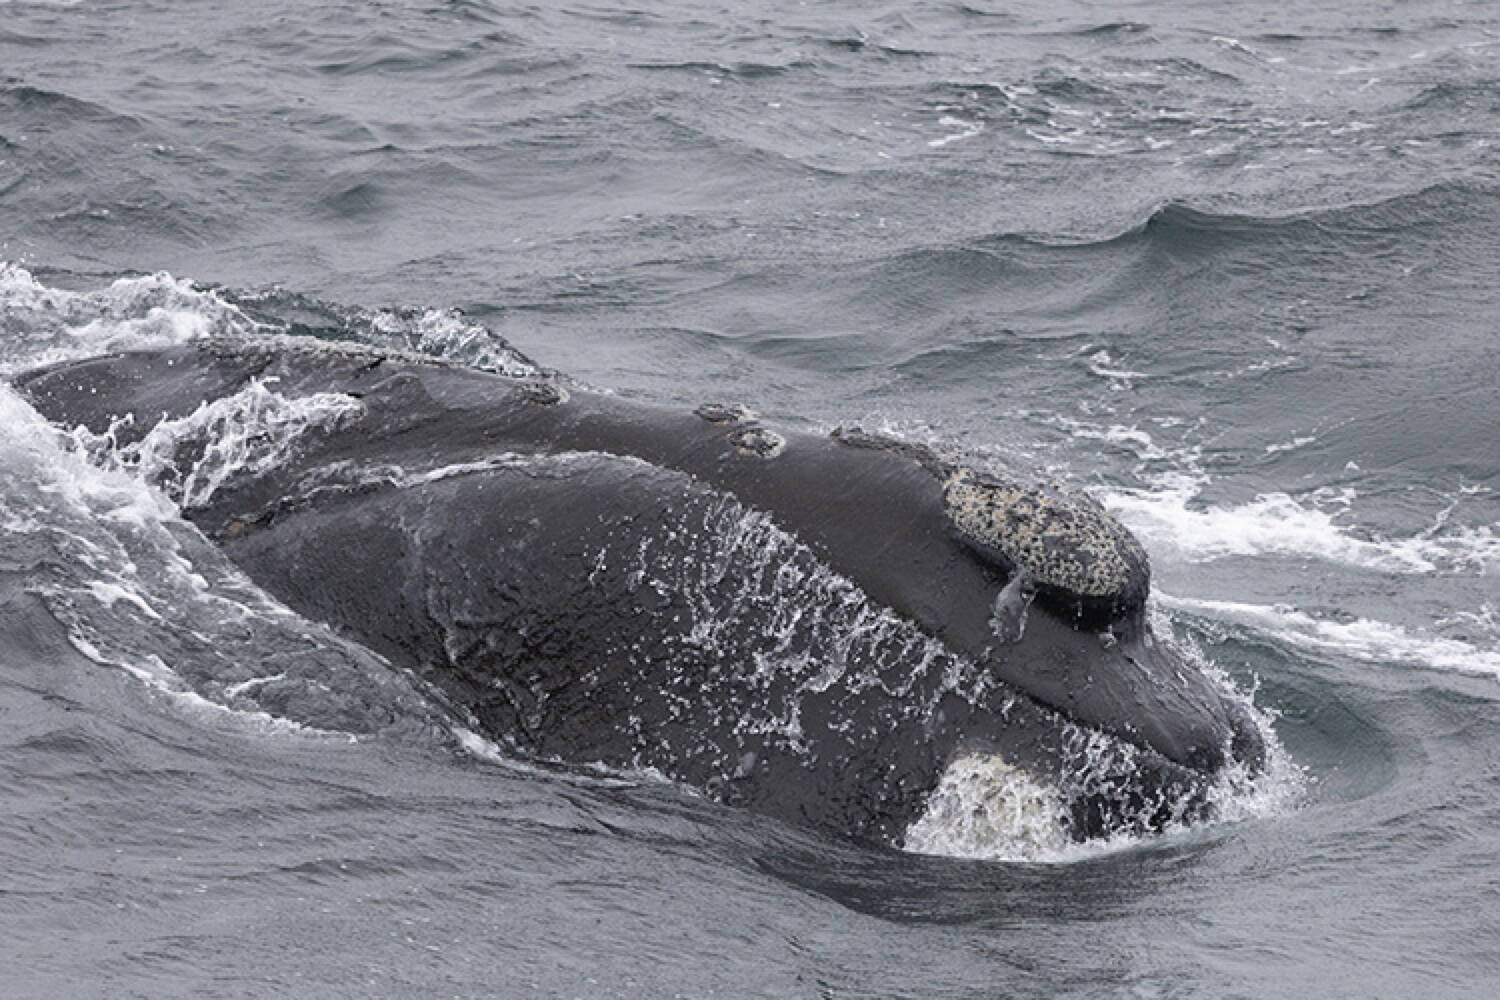 A previously unidentified Eastern North Pacific right whale surfaces in the waters of the Gulf of Alaska in September 2023. The discovery of this whale was hailed by scientists studying the critically endangered population. Members of the public are being asked to choose a name for the animal through an online contest that will use bracketed competition. (Photo by Bernardo Alps/NOAA Fisheries, International Whaling Commission and WildSea Inc.)